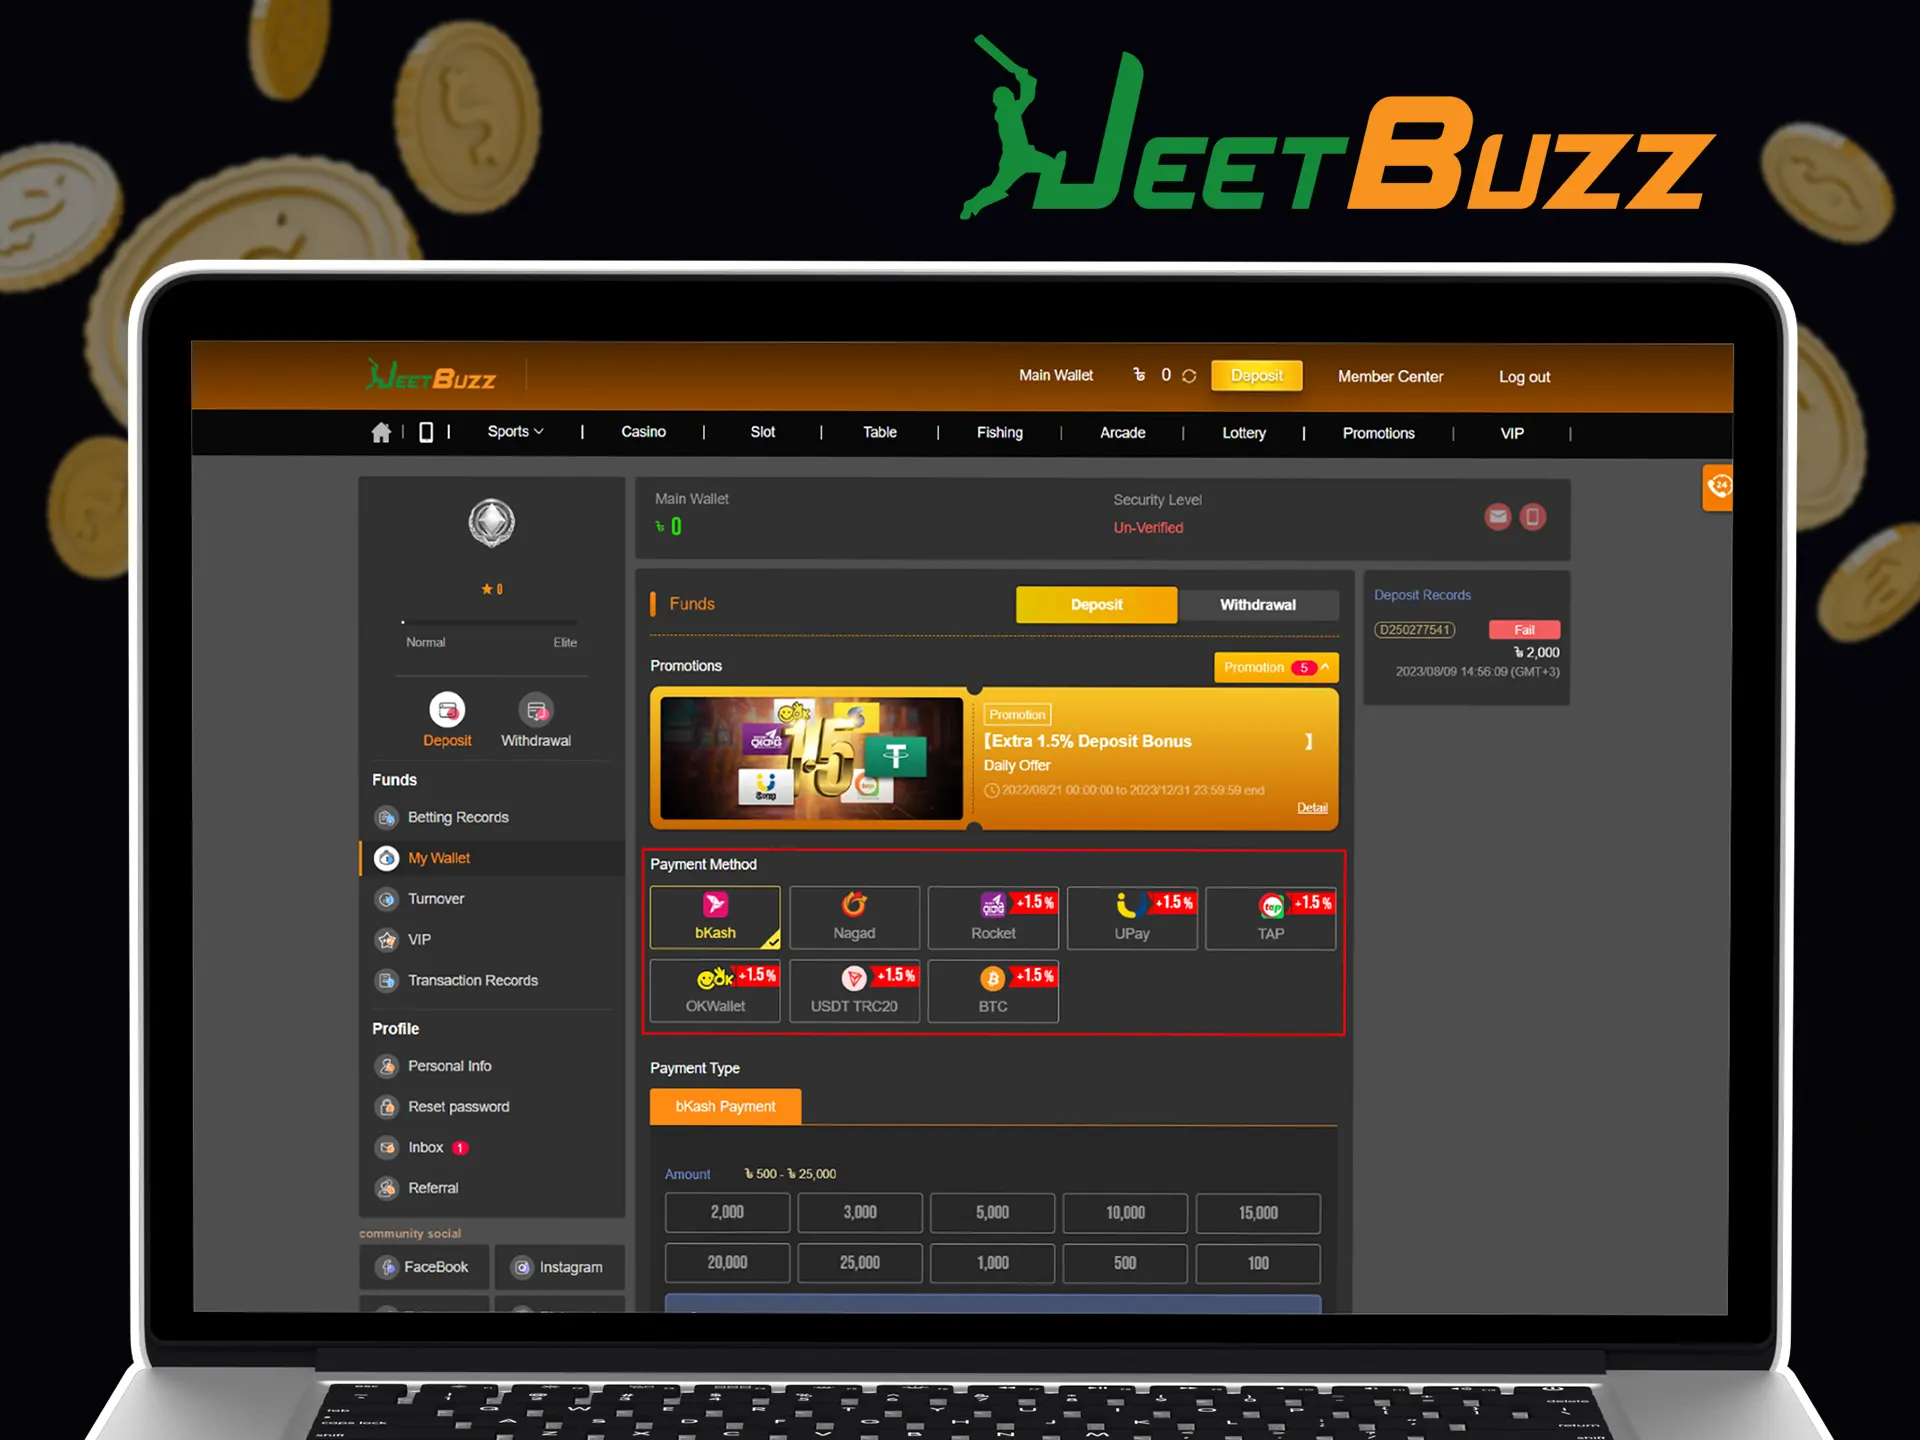 JeetBuzz have a variety of fast and secure payment methods.